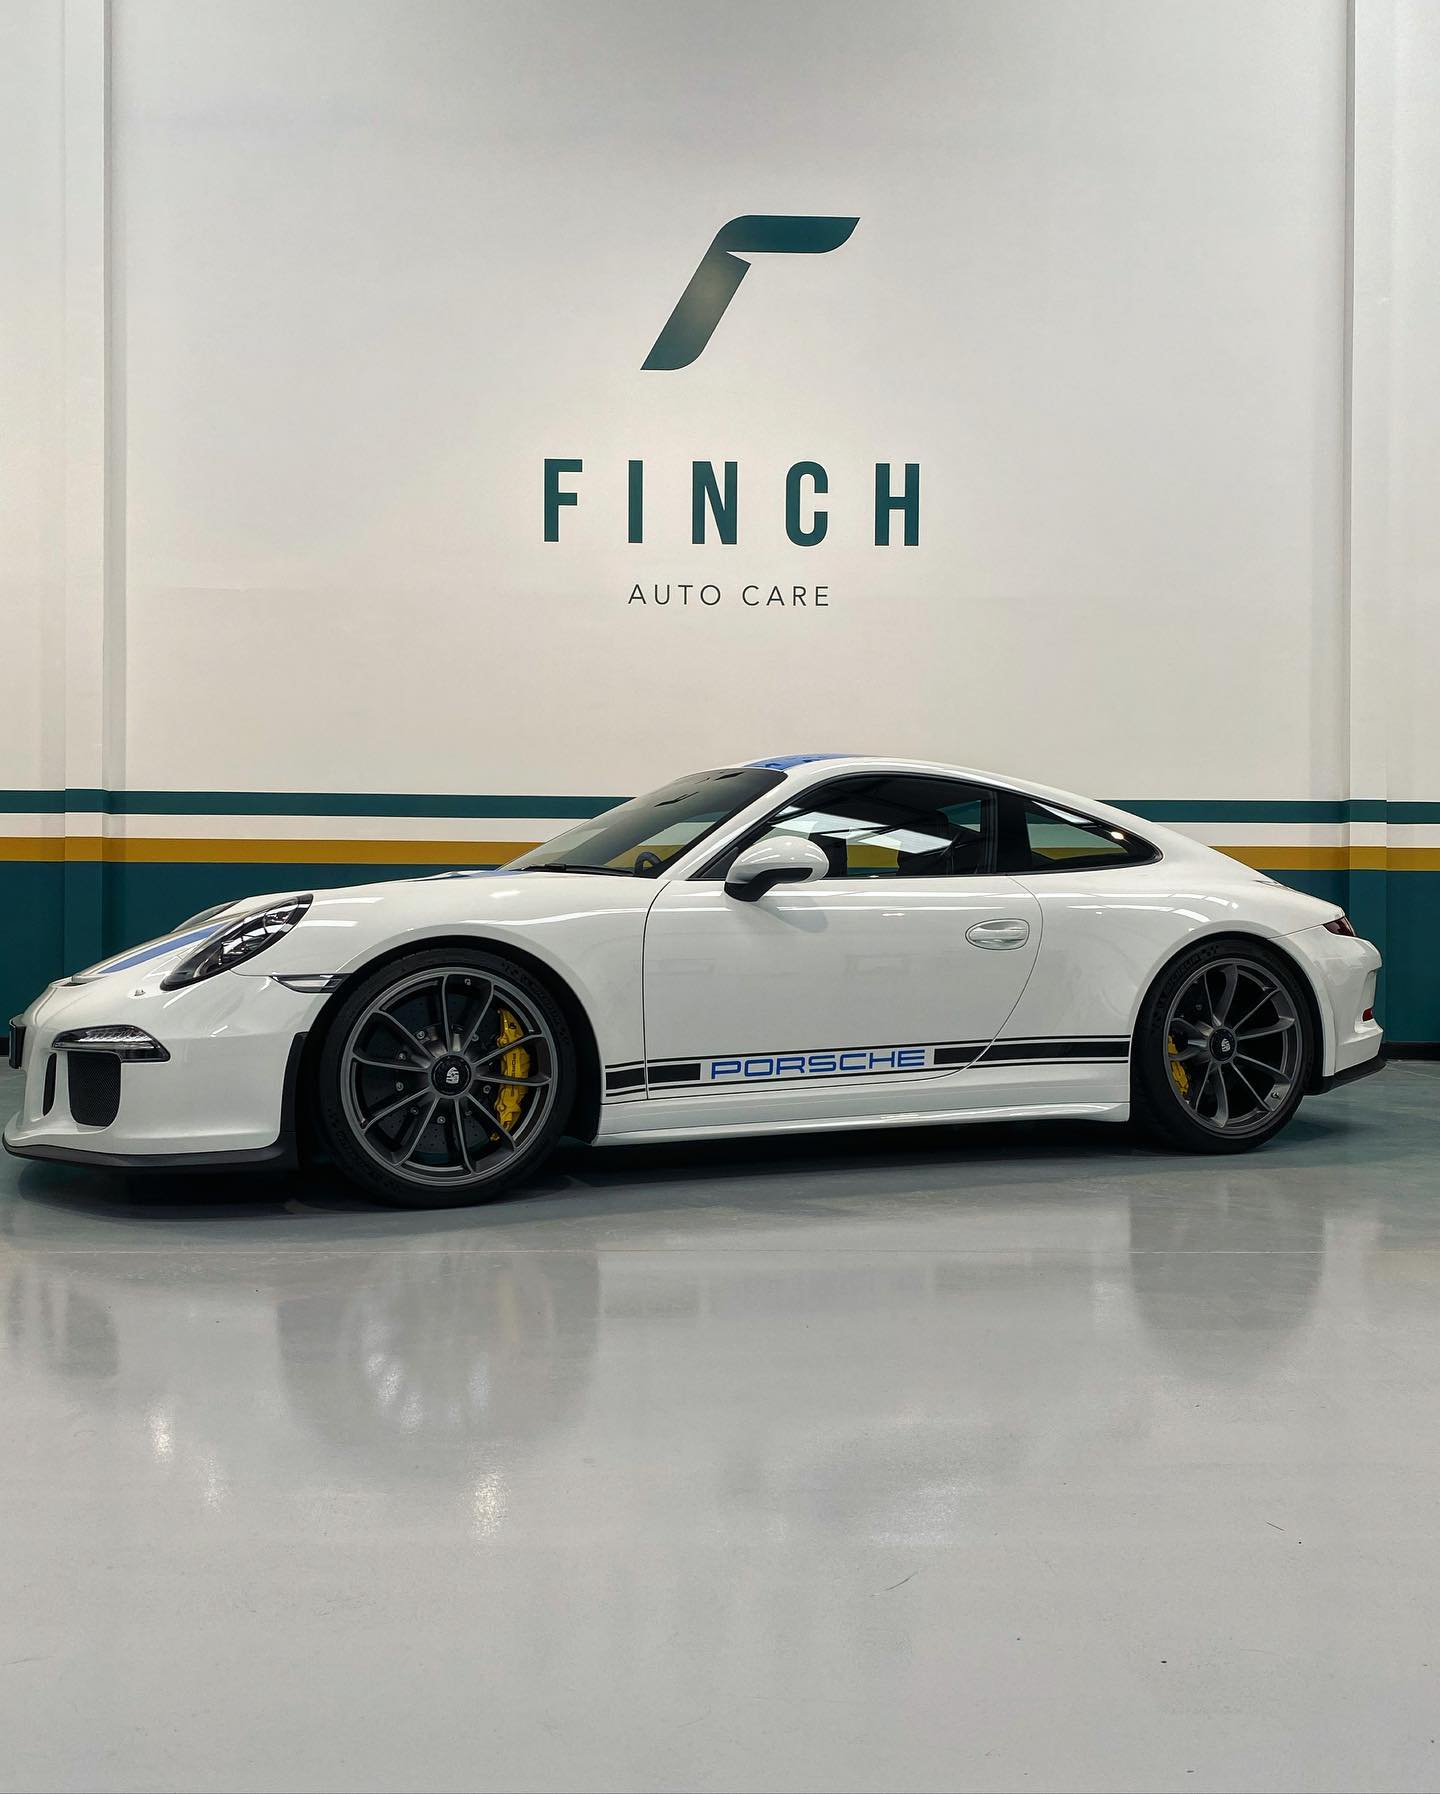 A white porsche 911 parked inside an auto care facility with the logo "finch" on the wall in the background.